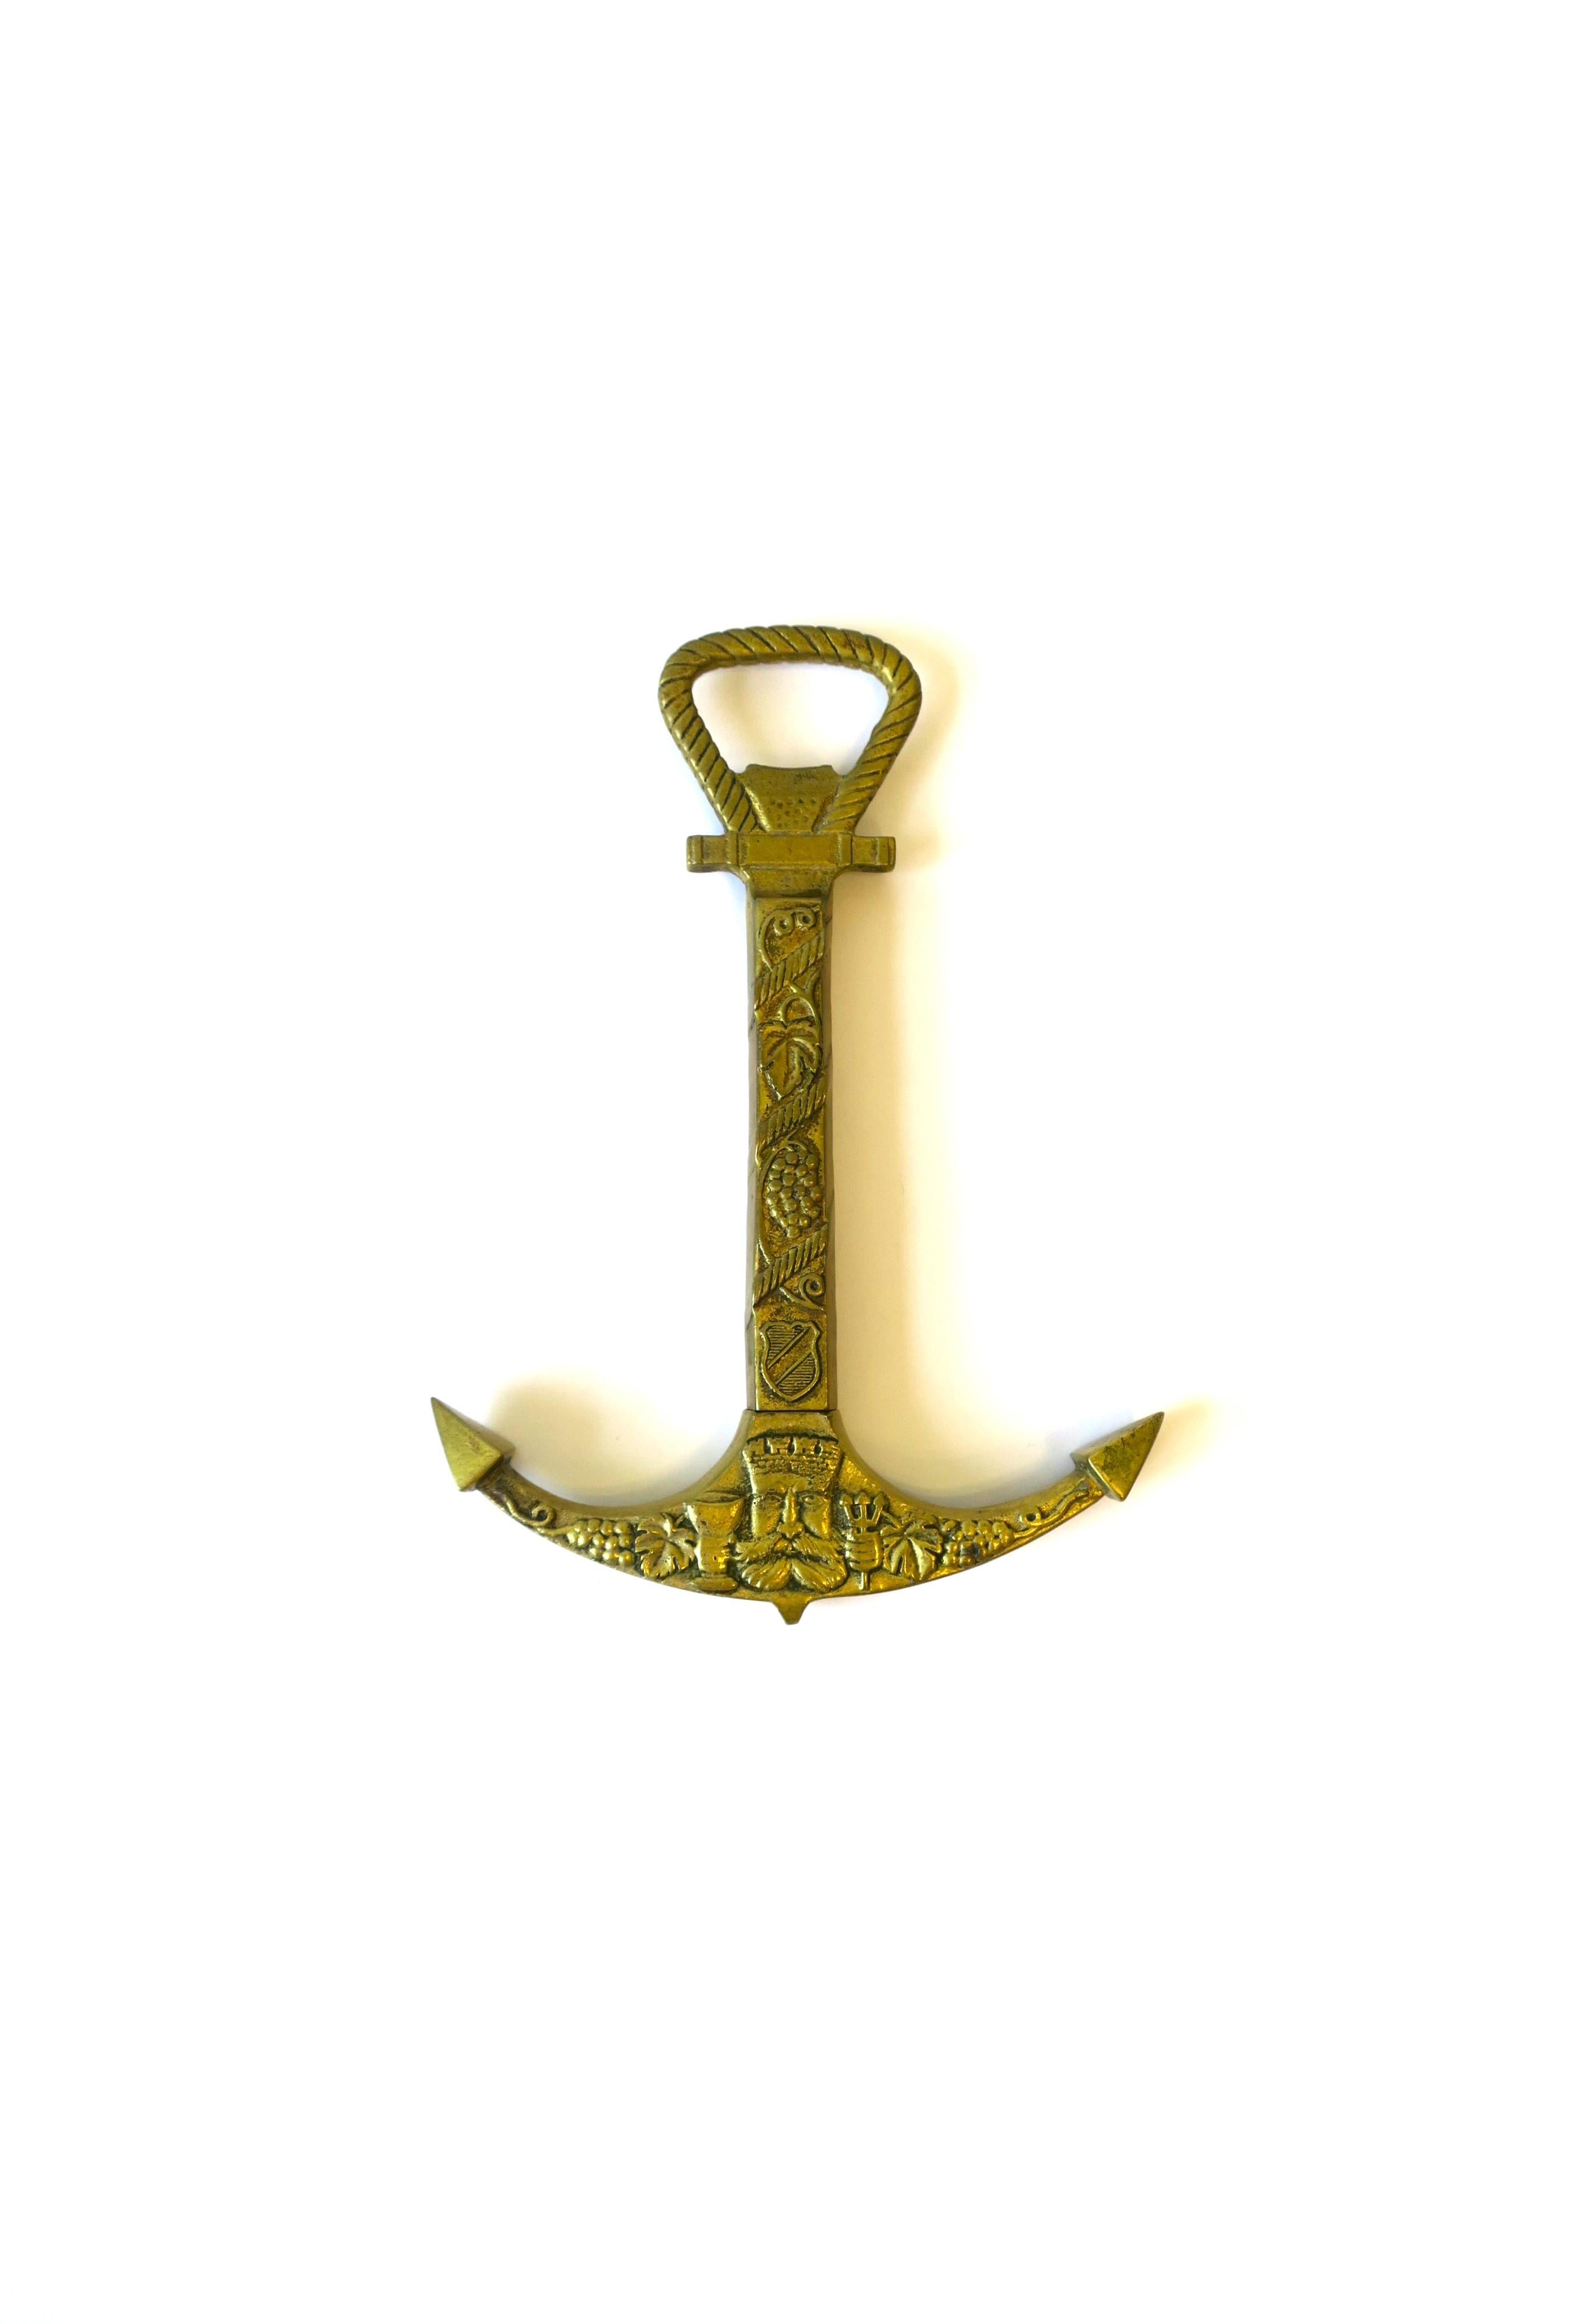 A vintage solid brass 'anchor' wine and bottle opener, circa mid-20th century, Scandinavia or Germany. A pull back of anchor reveals corkscrew, with bottle opener at top. Design details include 'rope' design at top, grapes, vines and leaves on front